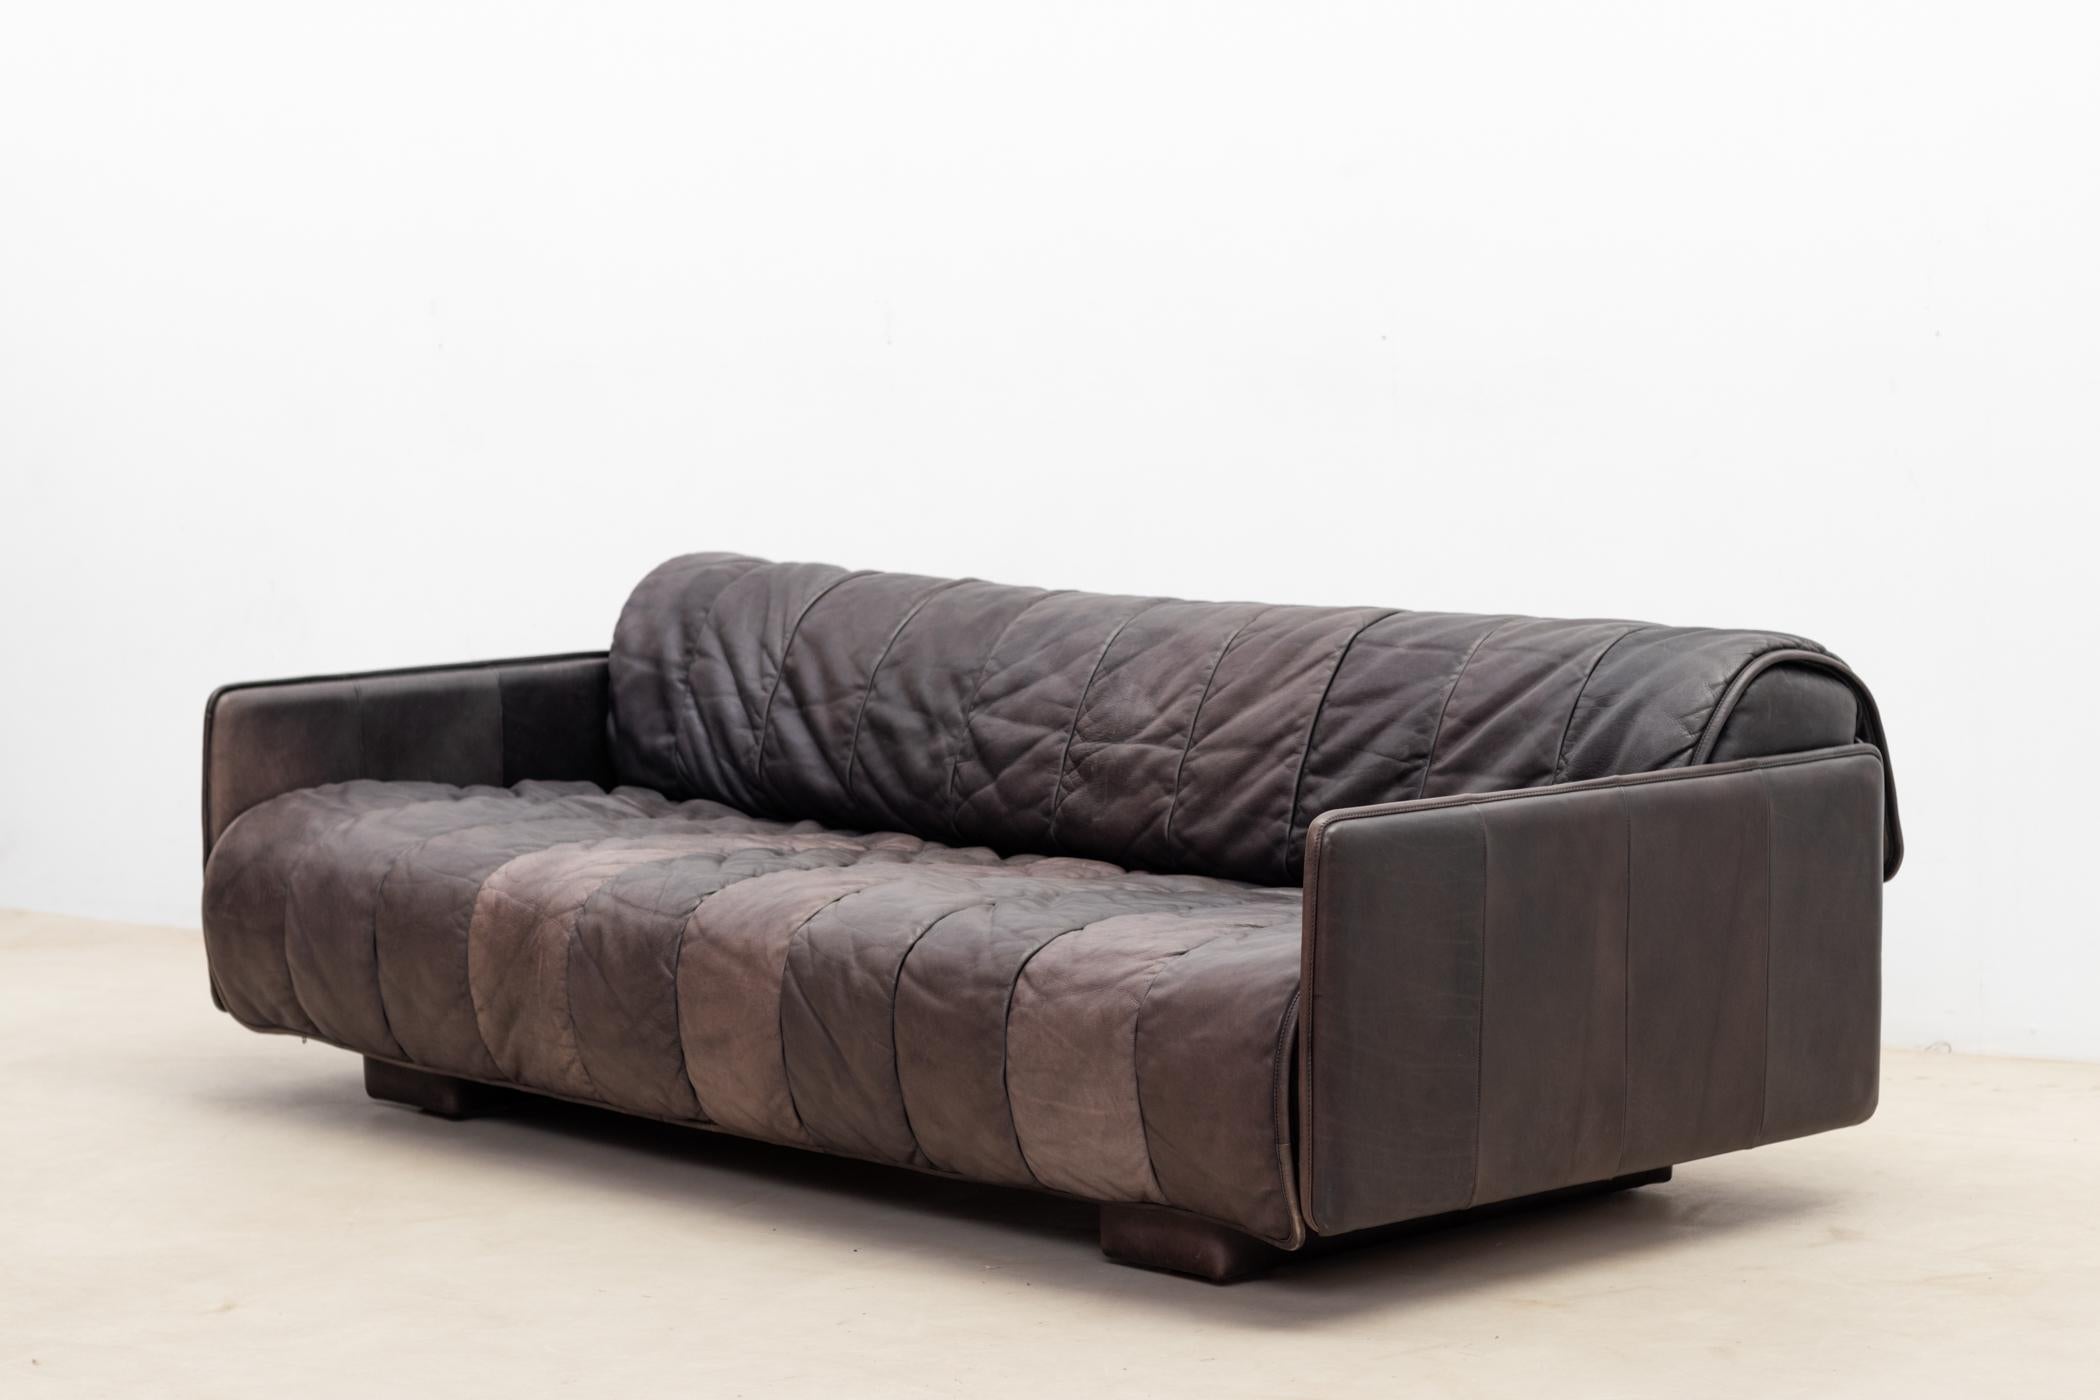 Offered here is a vintage DeSede sofa or daybed, the DS 69, upholstered in high-quality brownish-grey stitched leather from the 1970s, made in Switzerland.
Comfortable sofa can be used as a stand-alone seating option or, thanks to its extendable